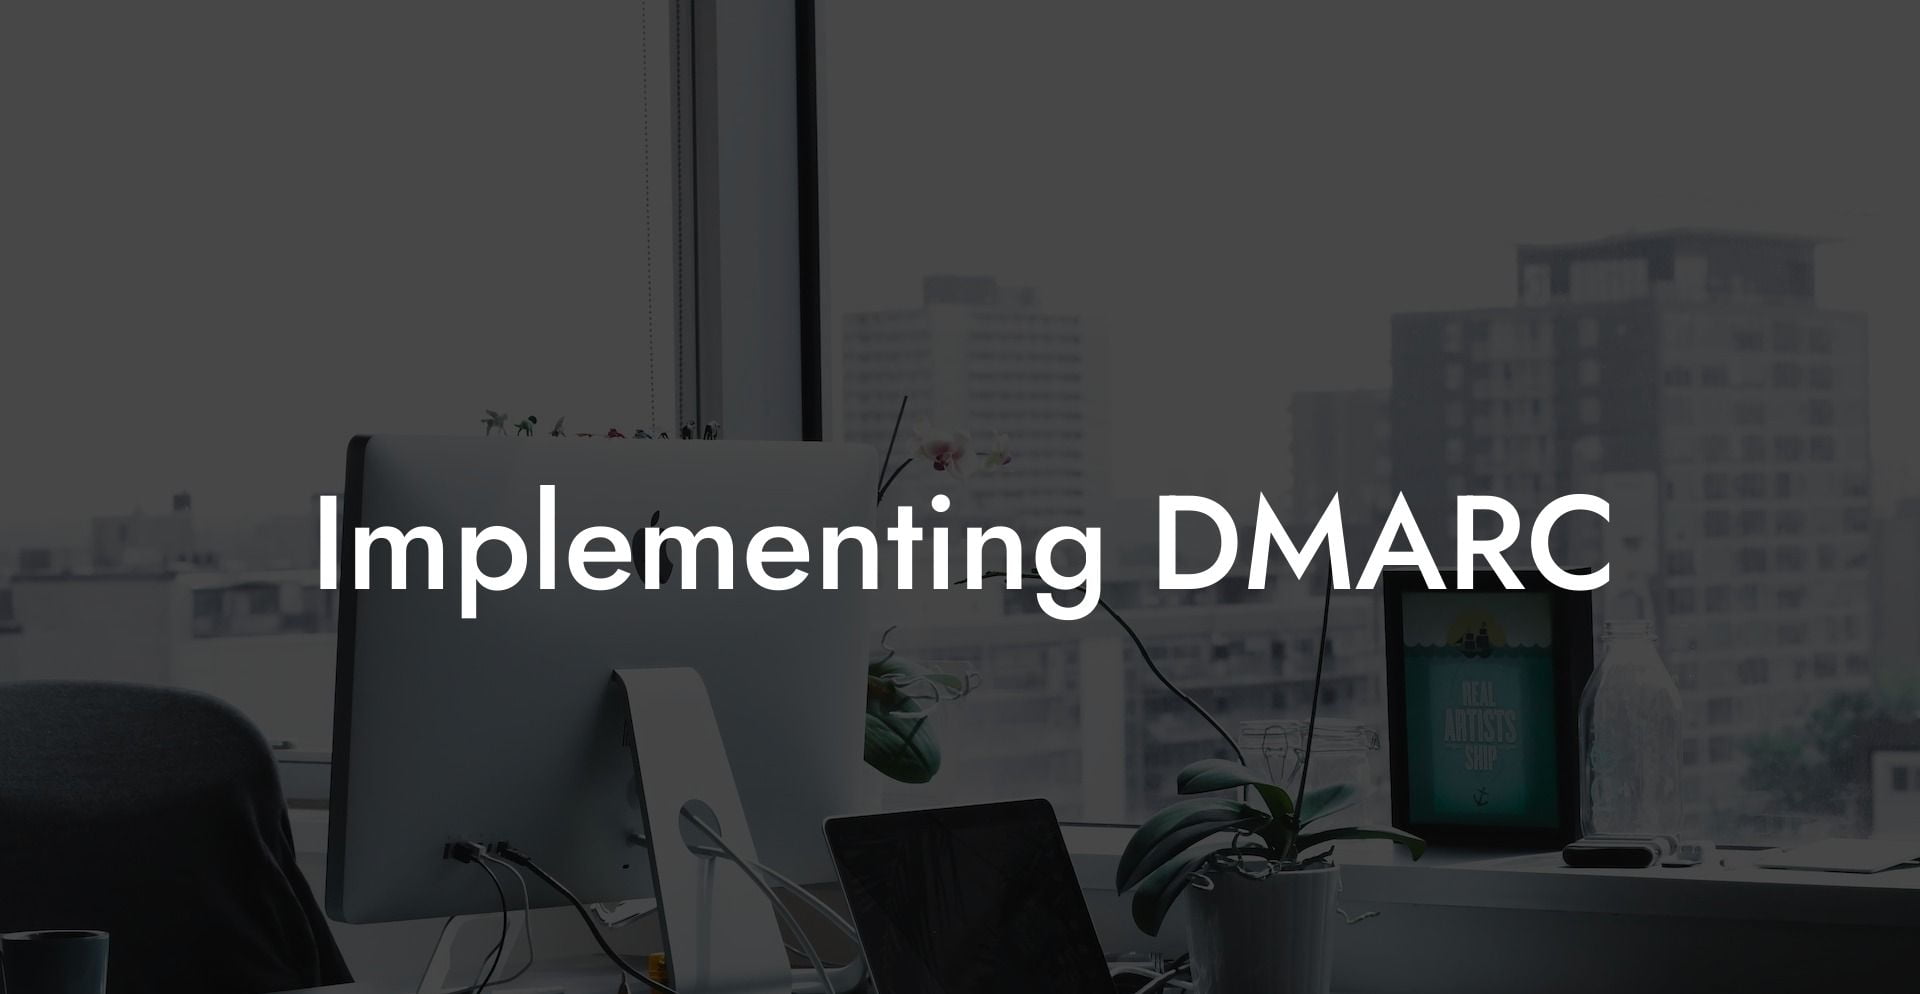 Implementing DMARC